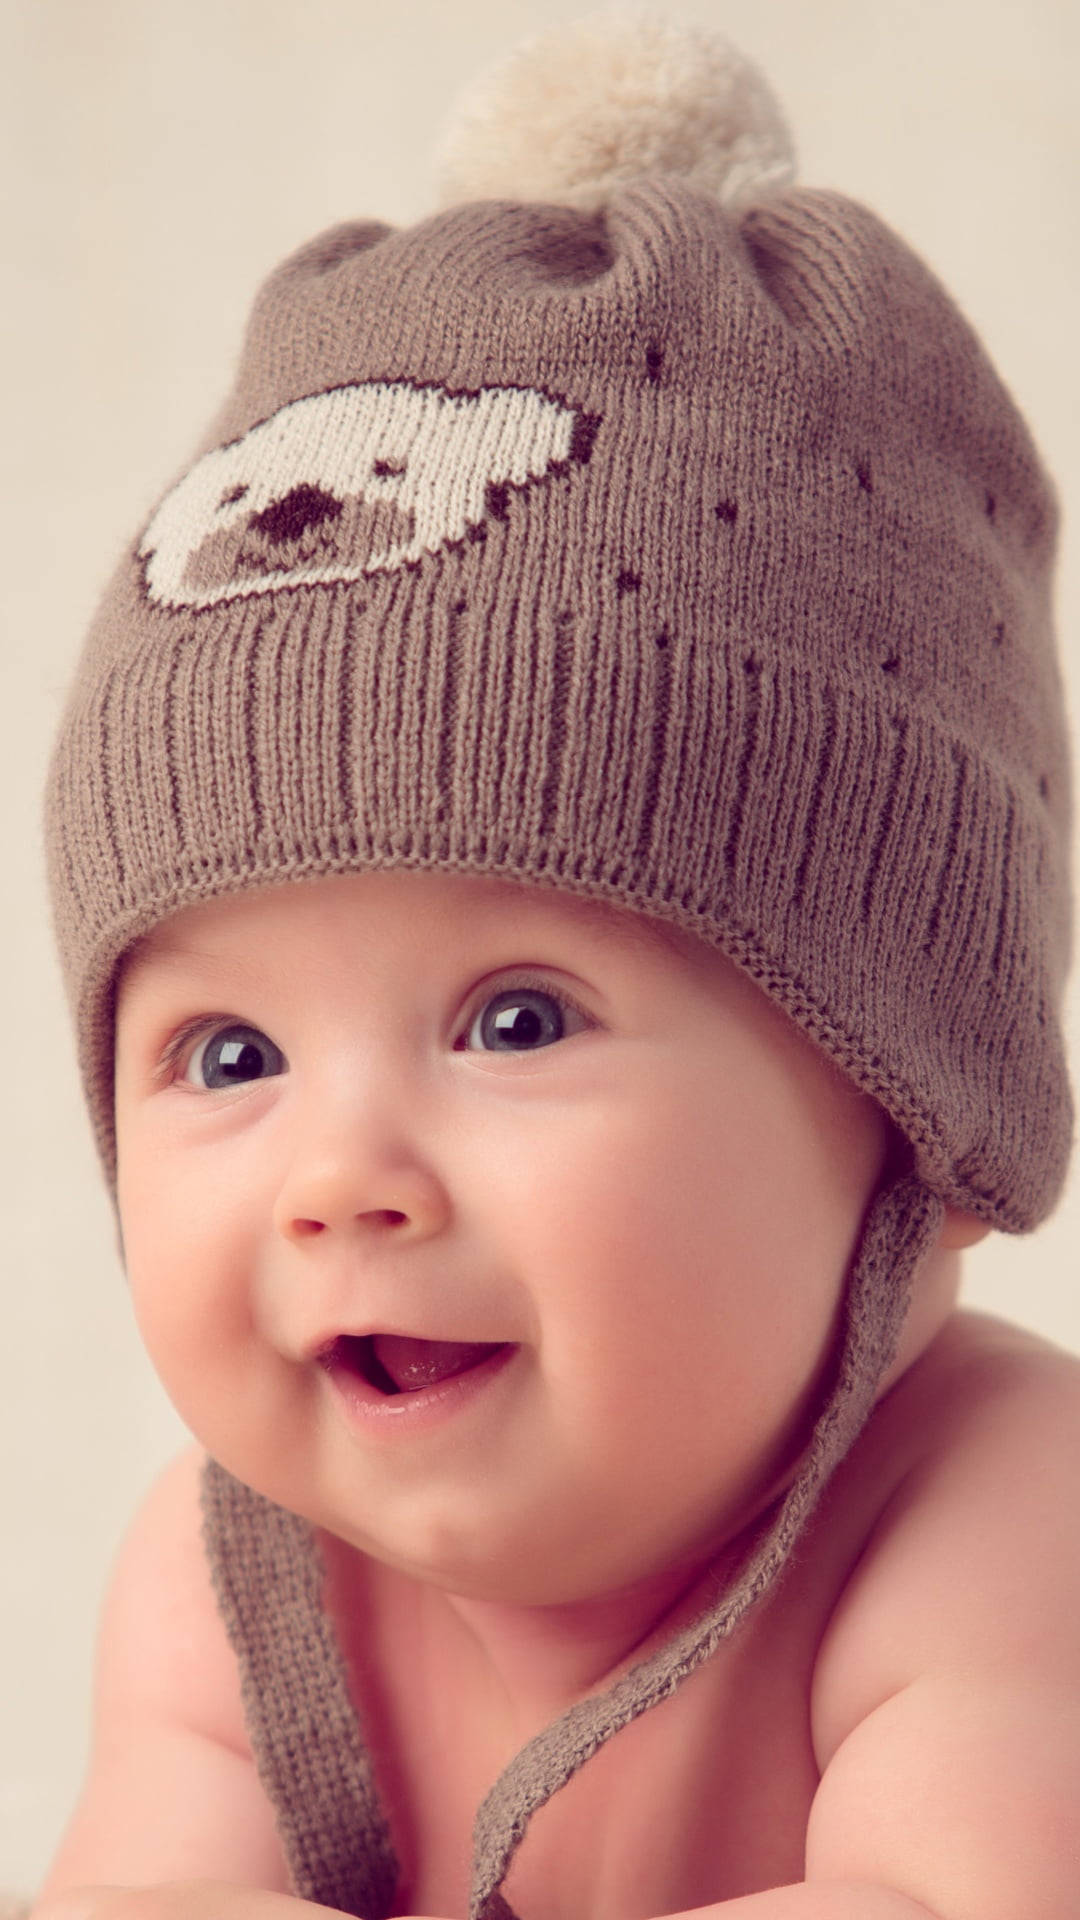 Cute Baby With A Bonnet